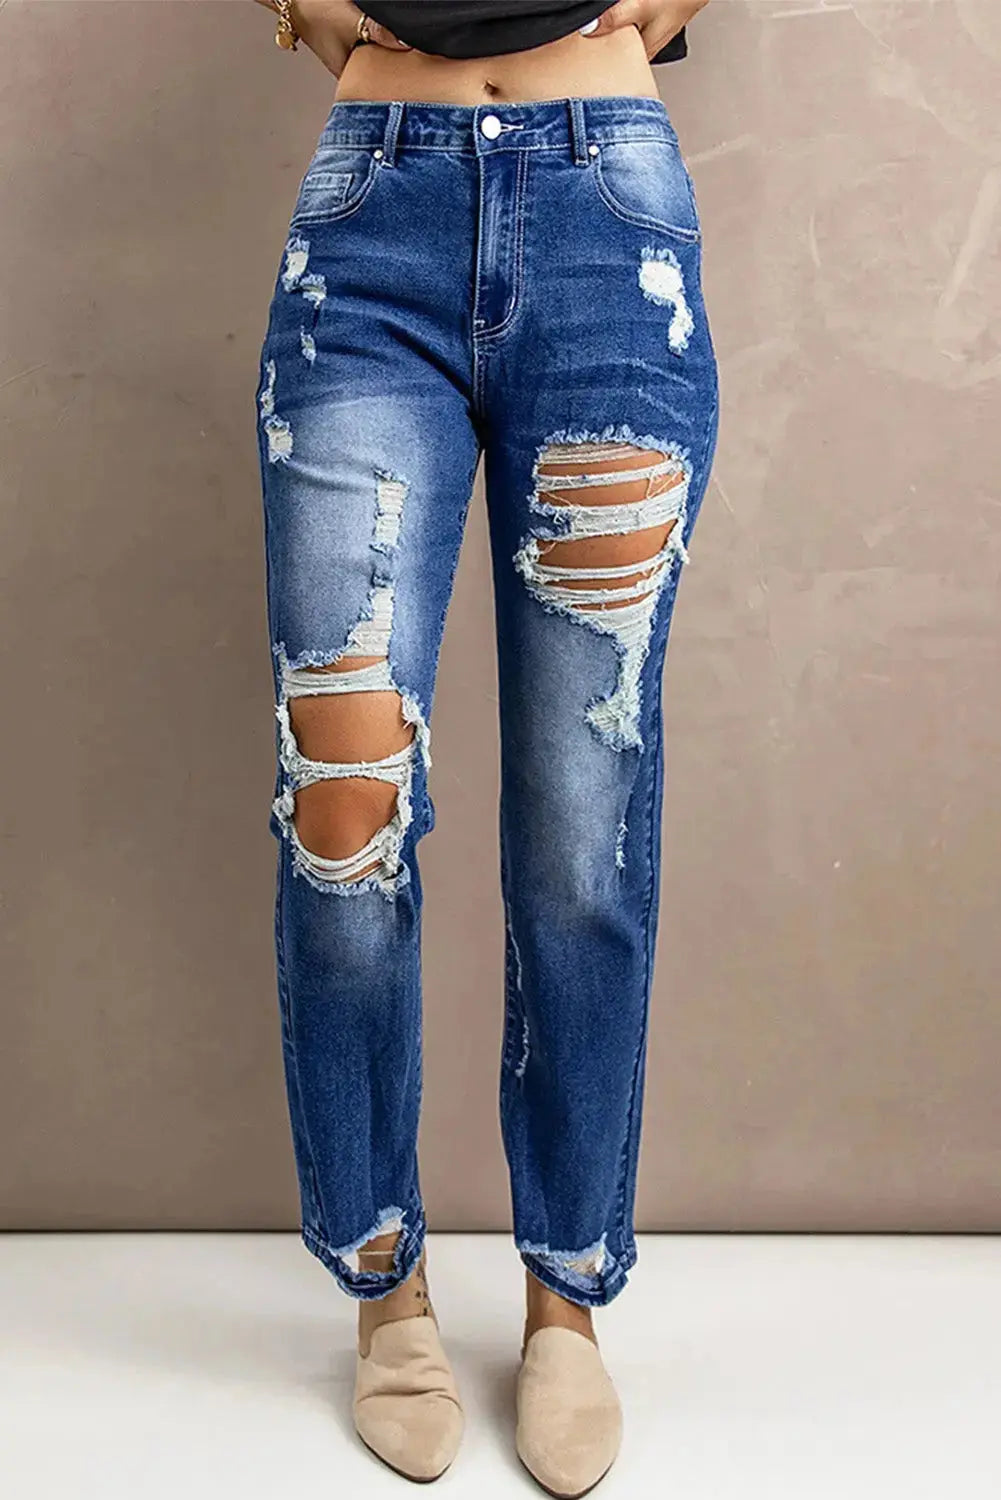 High rise jeans with pockets jeans with pockets on the side